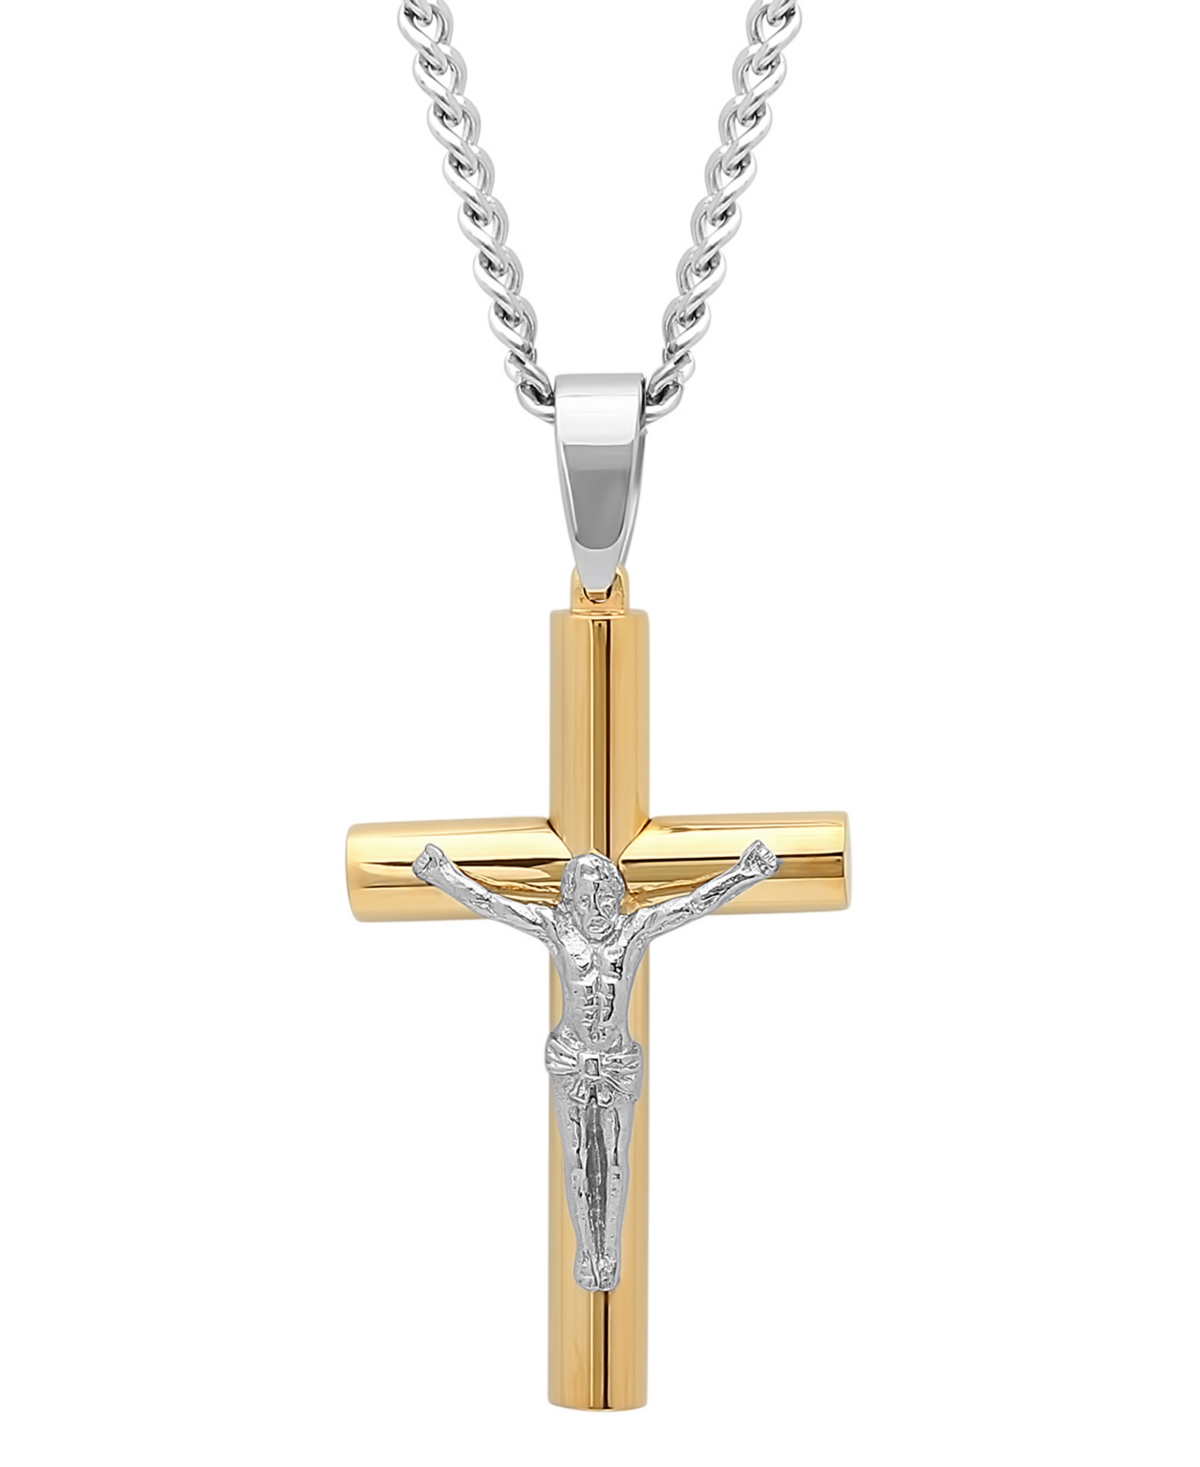 C & c Jewelry Macy's Men's Rounded Cross Crucifix Pendant Necklace in Two-Tone Stainless Steel